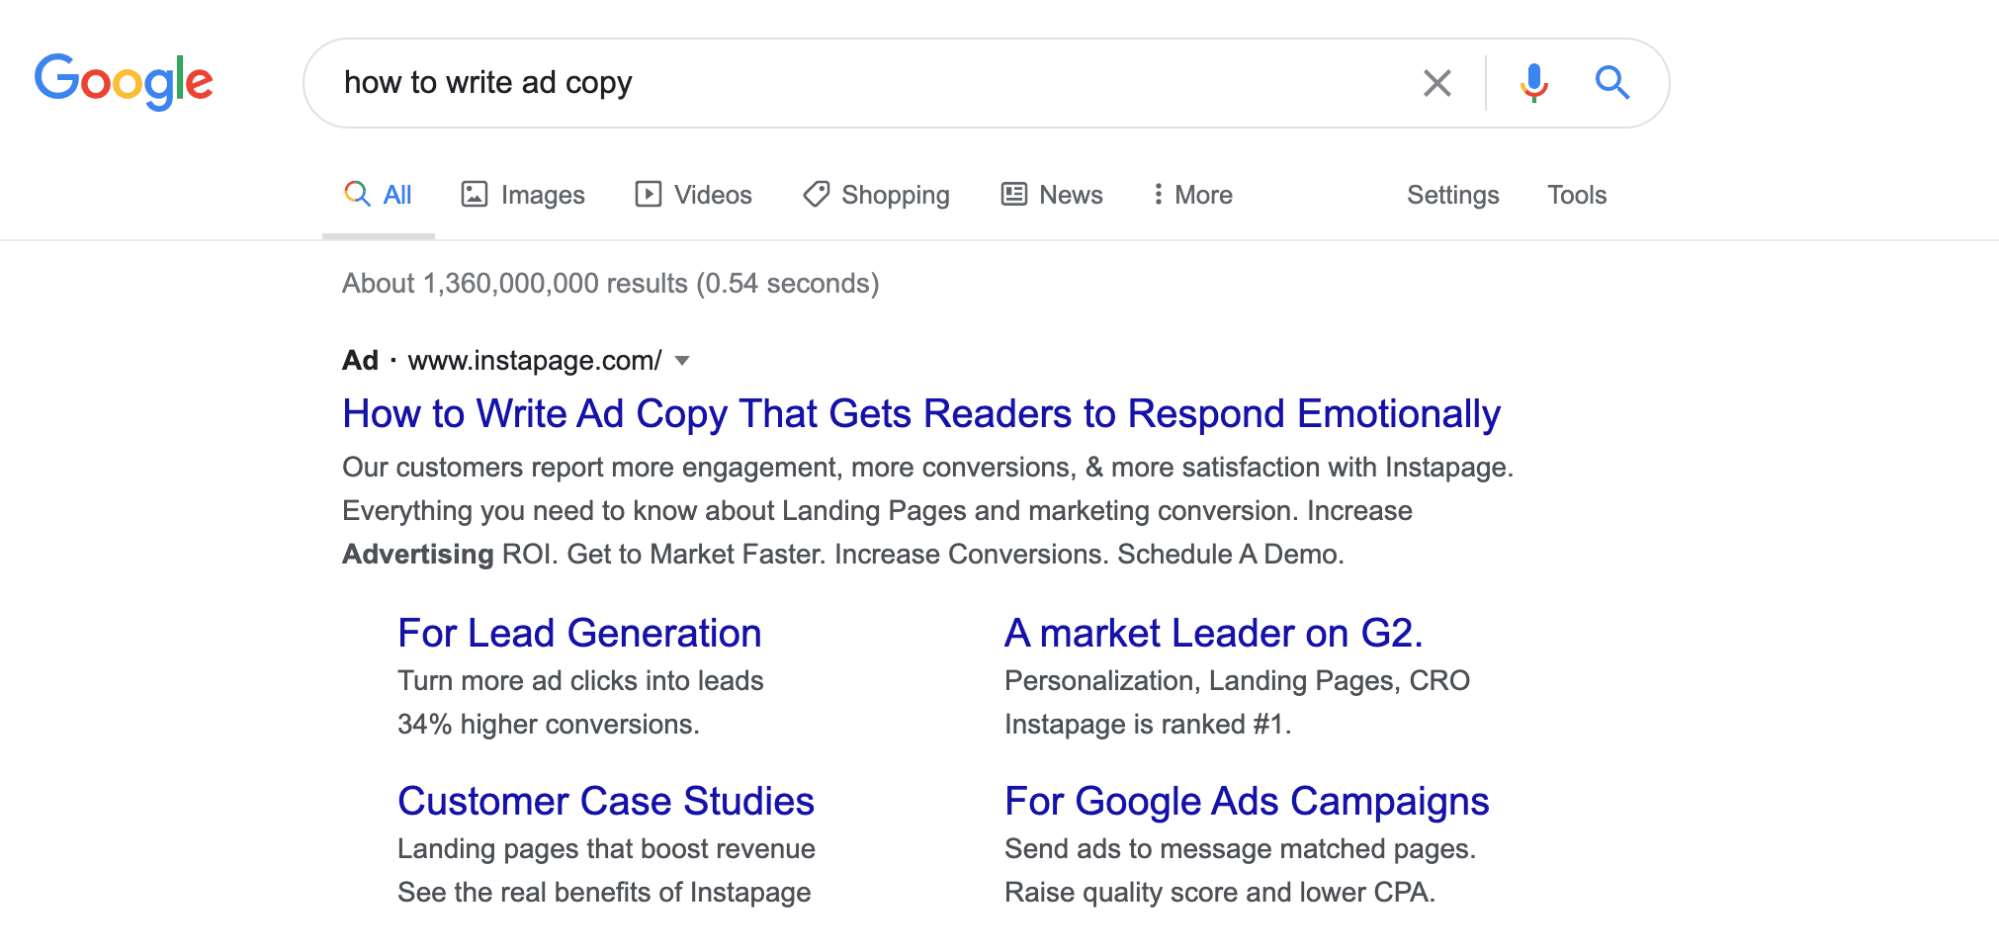 Google Ads How to Write Ad Copy Example